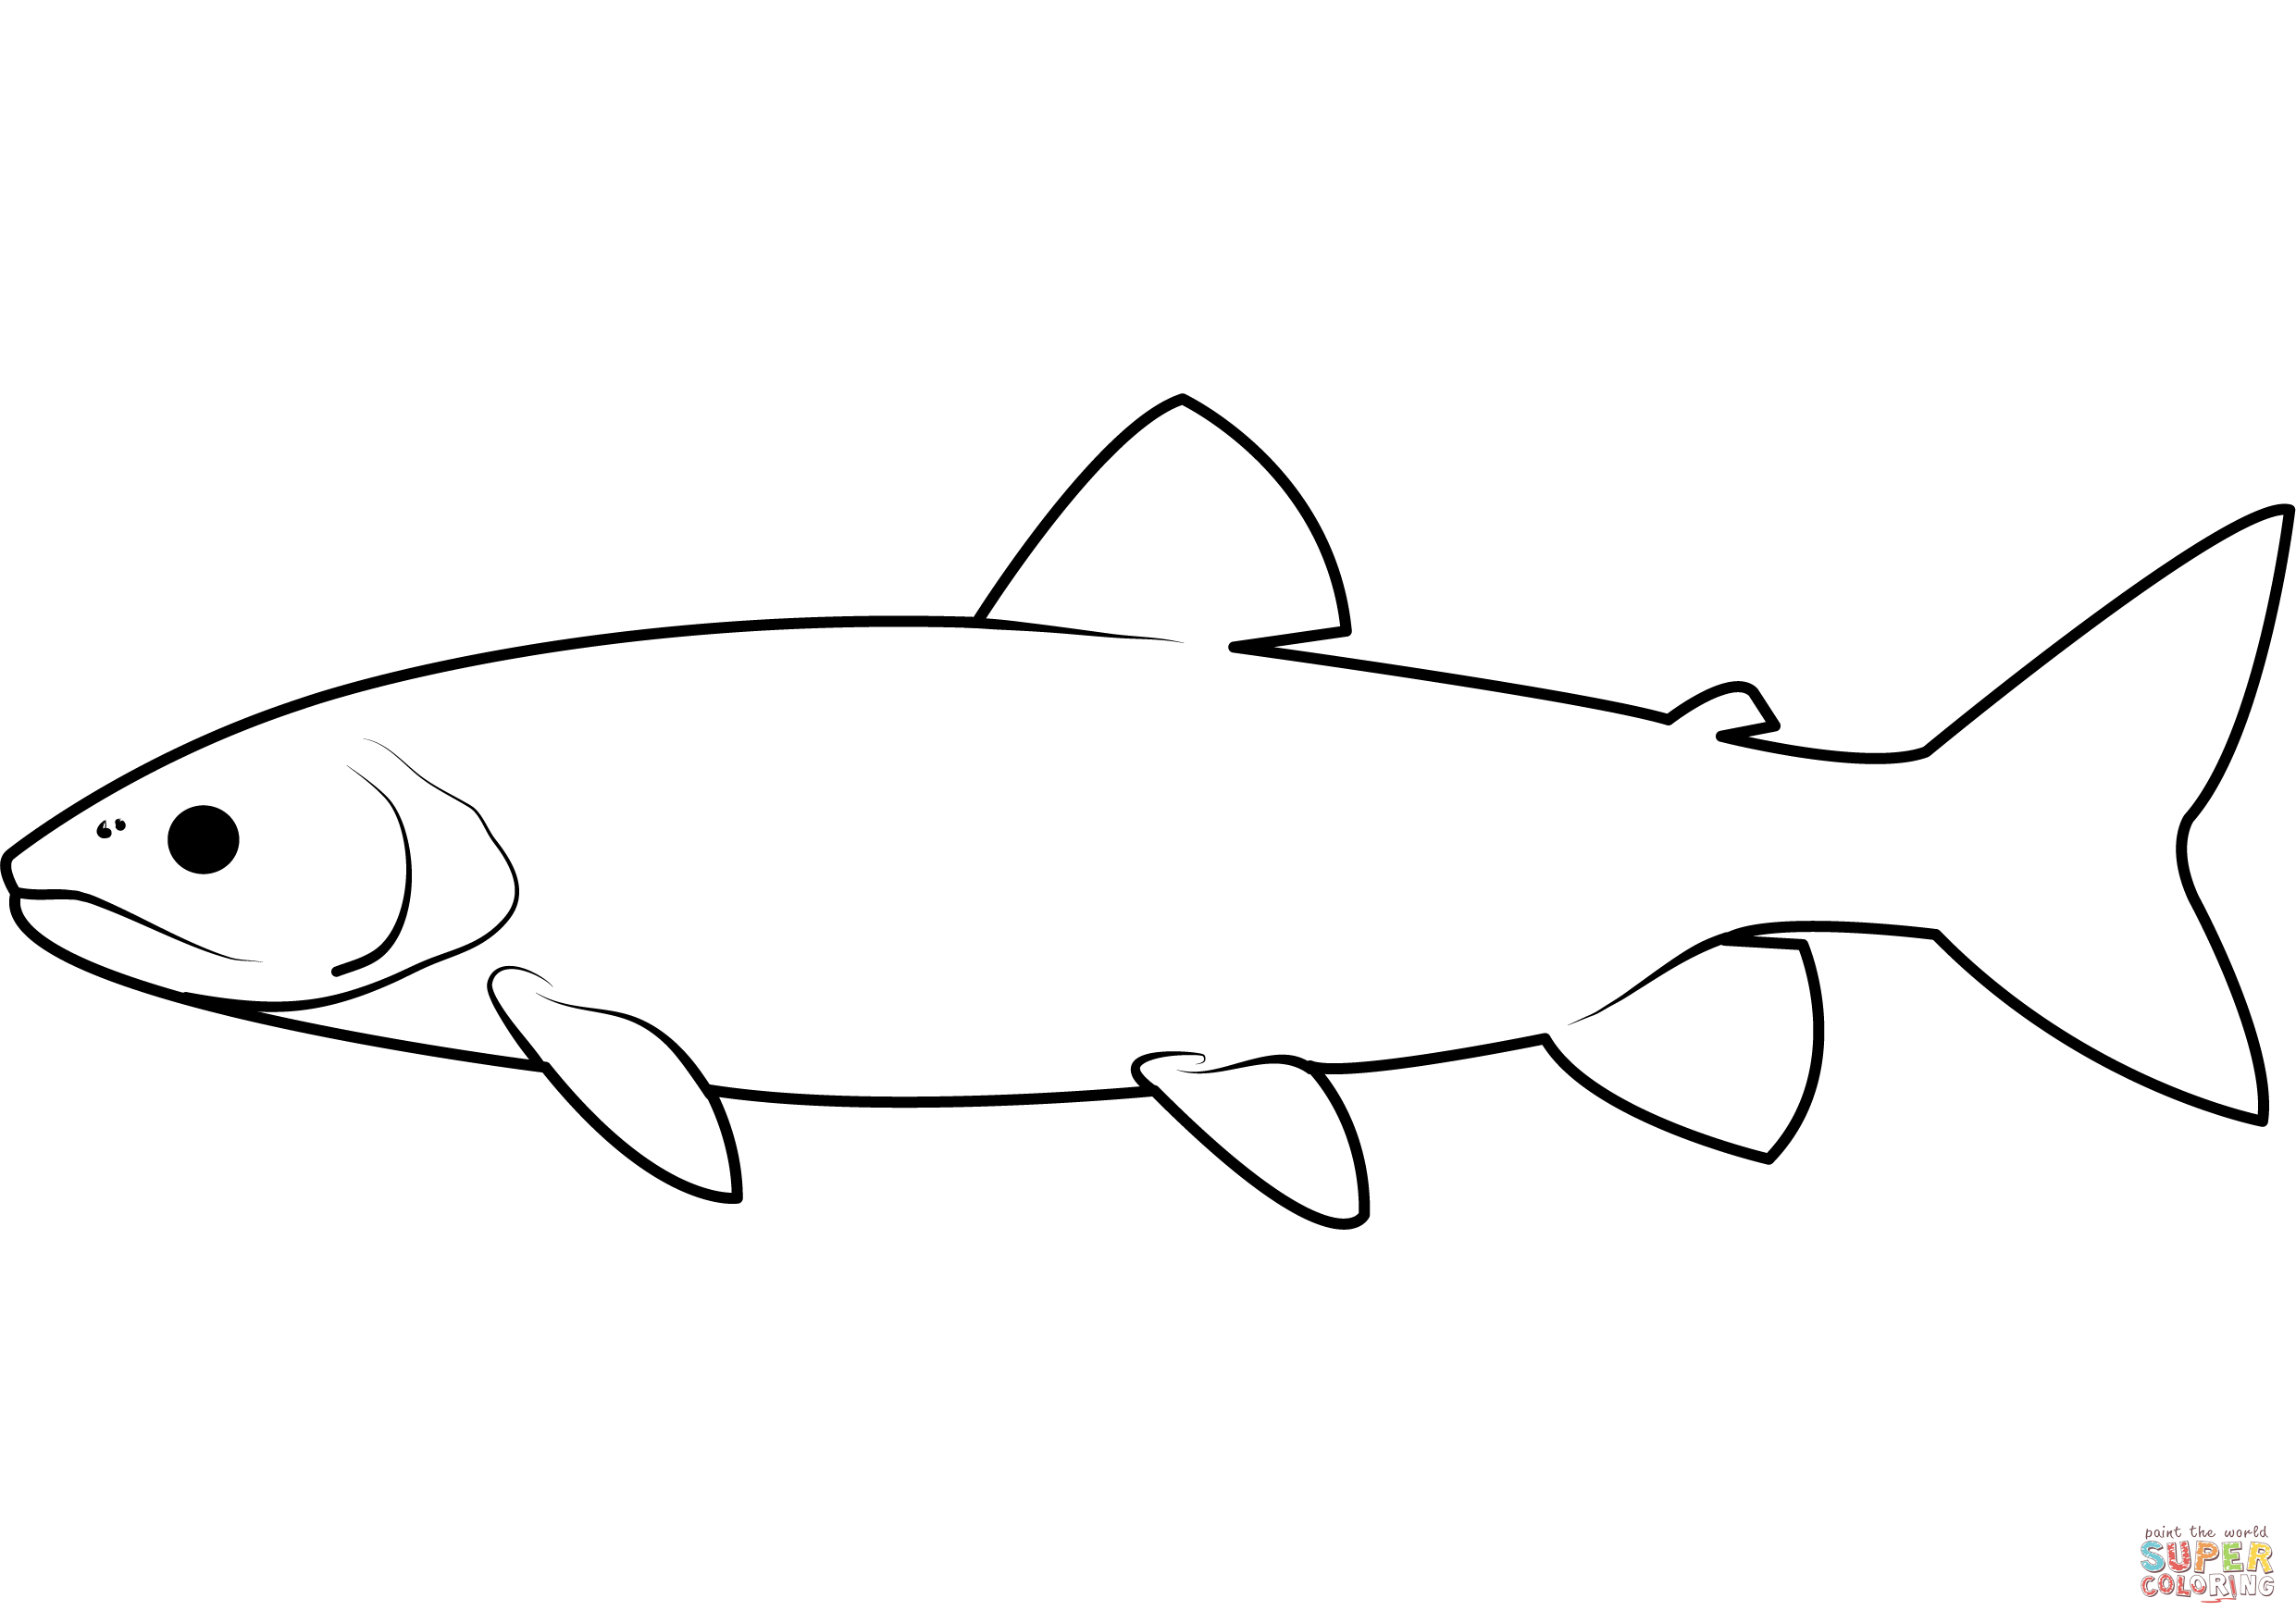 Lake trout salvelinus namaycush coloring page free printable coloring pages